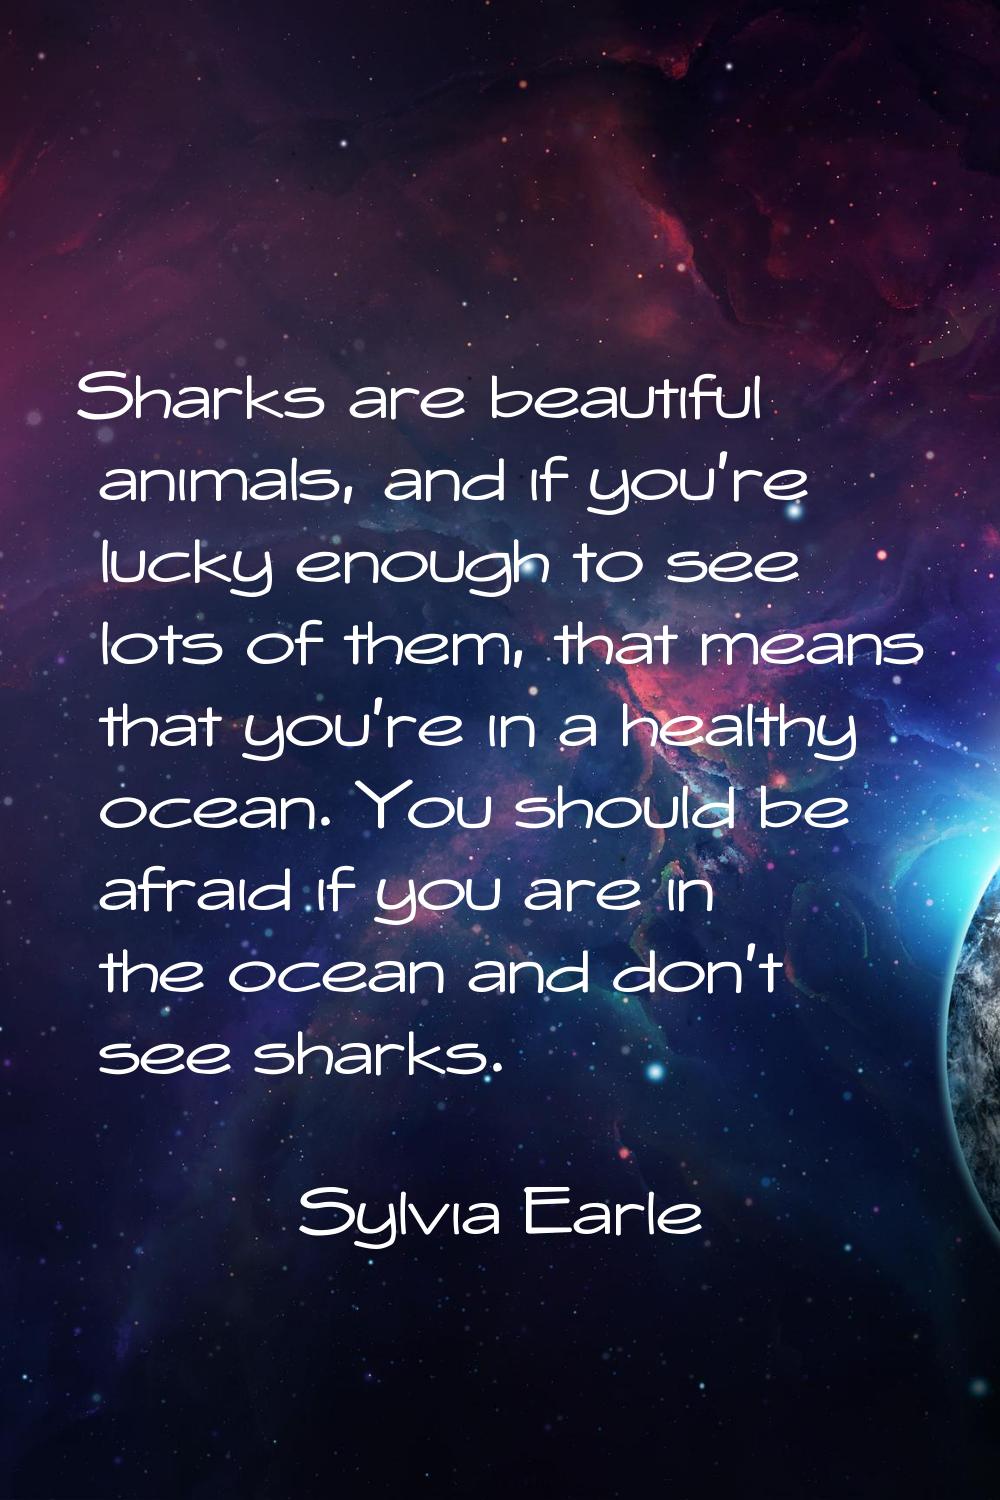 Sharks are beautiful animals, and if you're lucky enough to see lots of them, that means that you'r